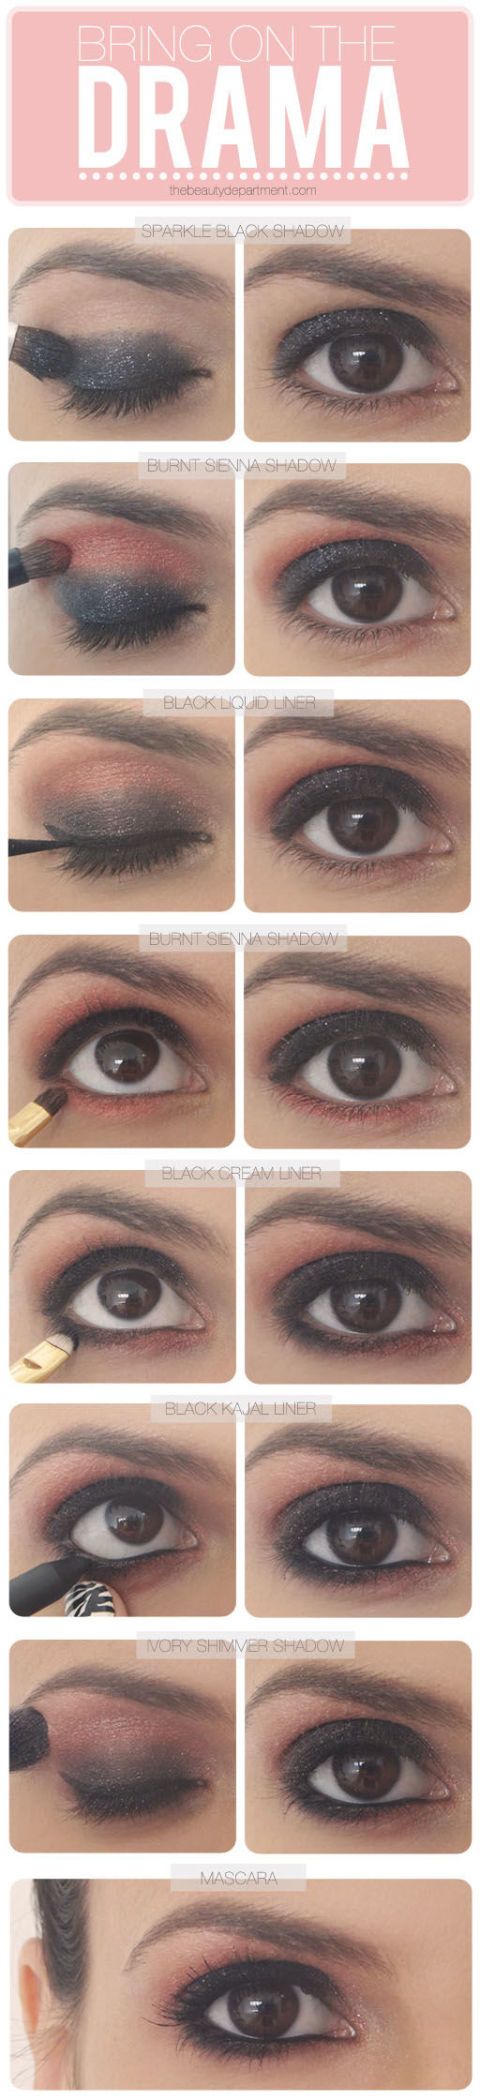 10 Eye Makeup Tutorials From Pinterest Thatll Turn You Into A